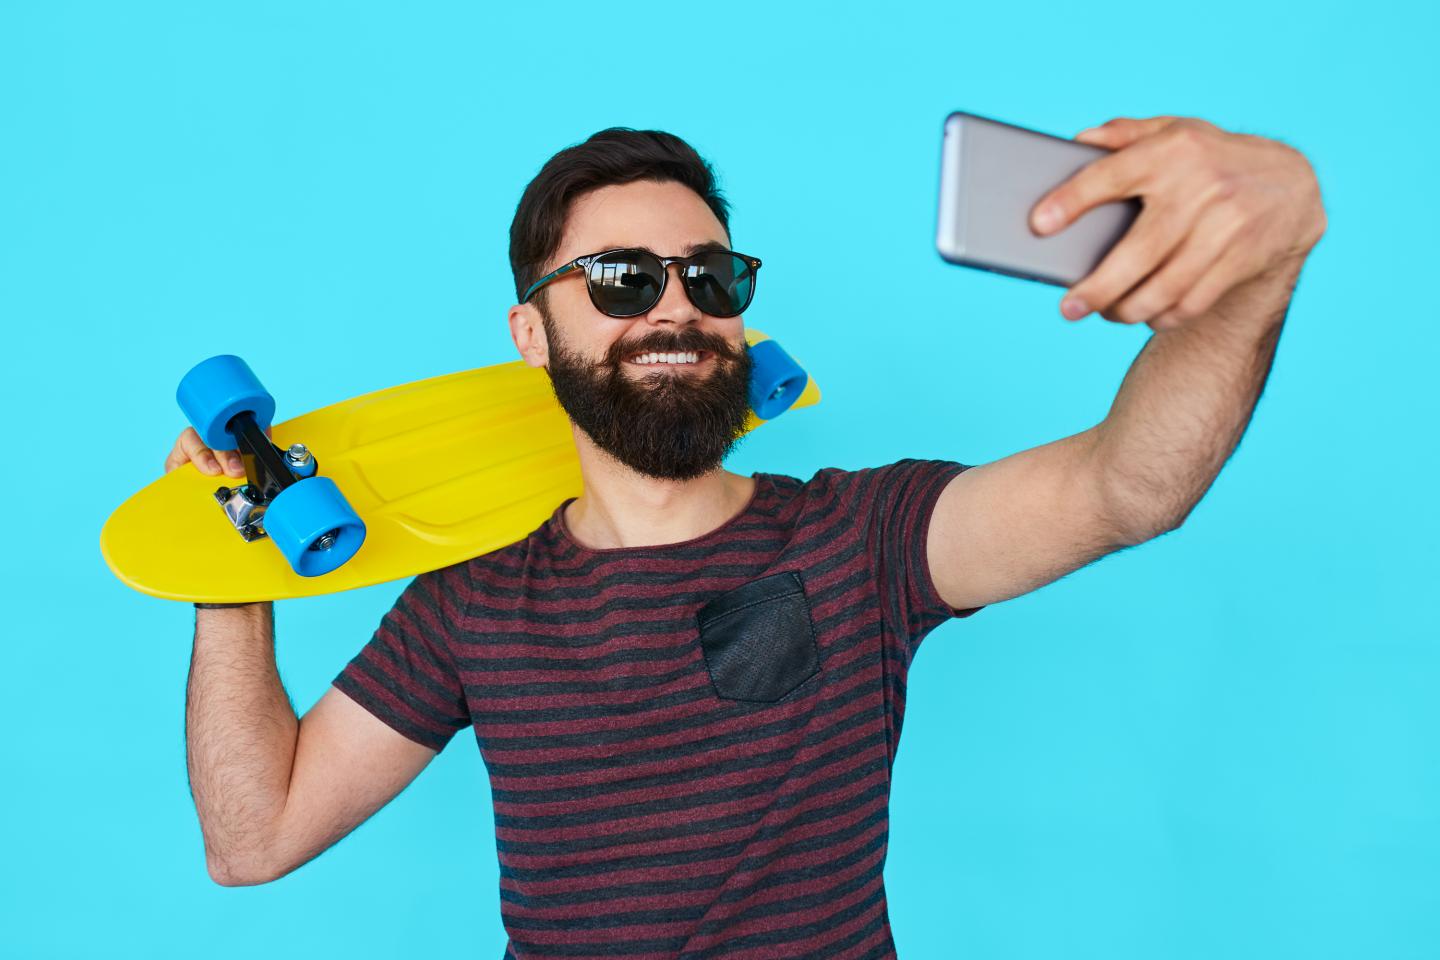 Posting Lots of Selfies Can Increase Narcissism -- New Research